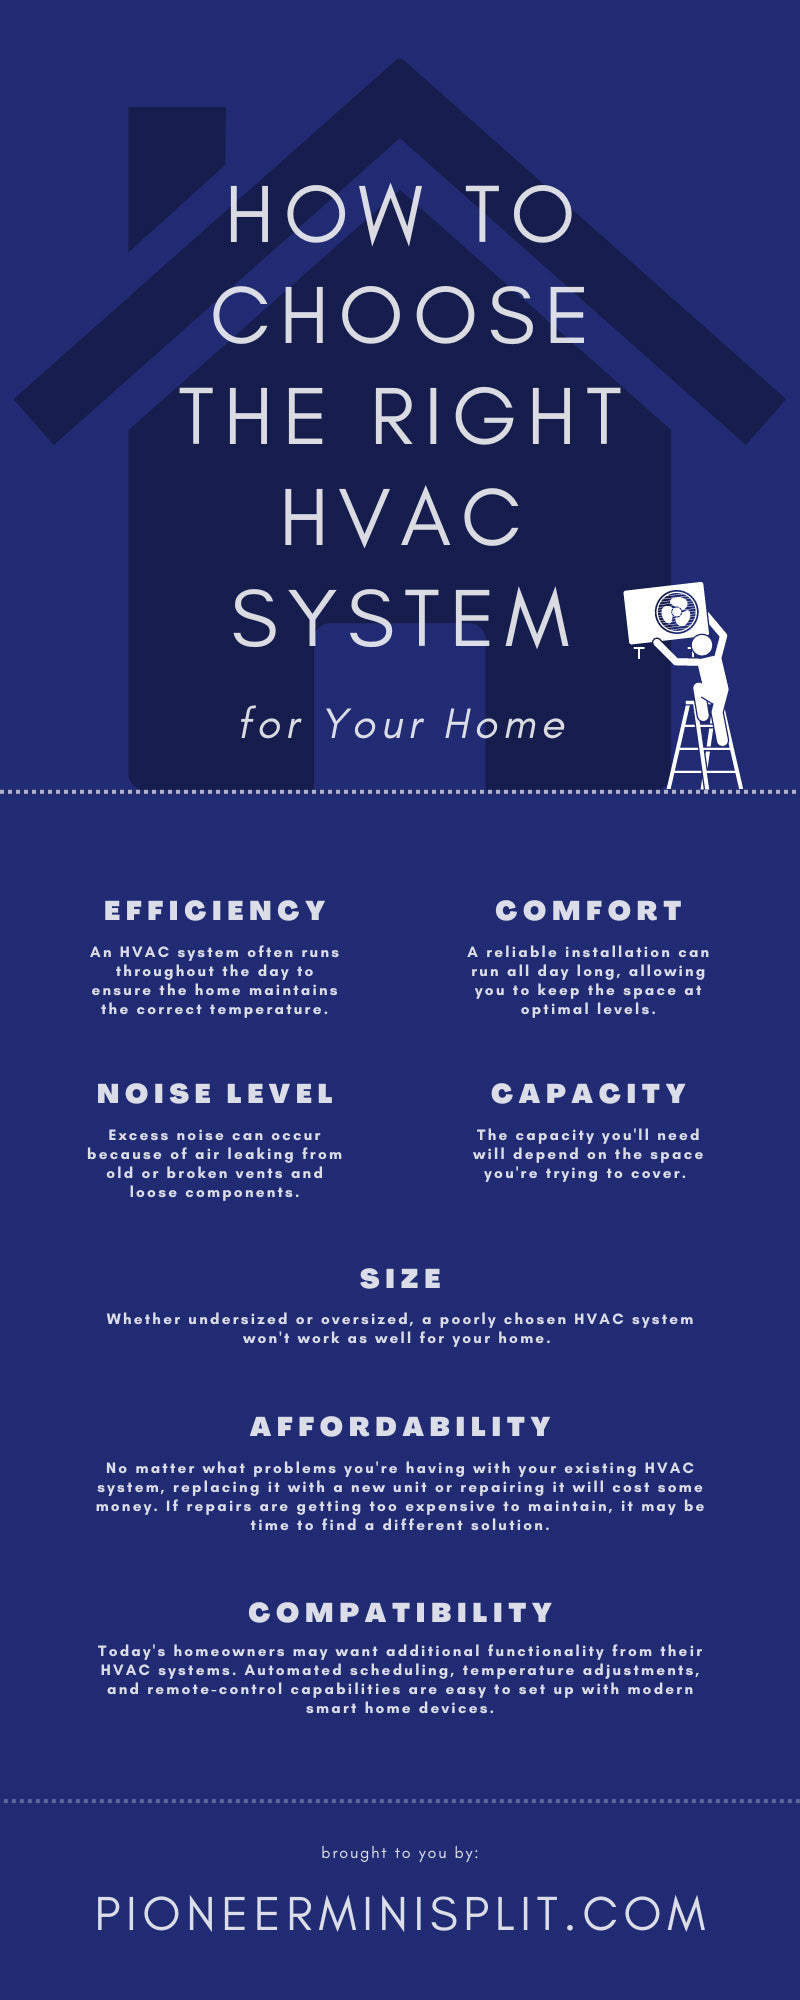 How To Choose the Right HVAC System for Your Home